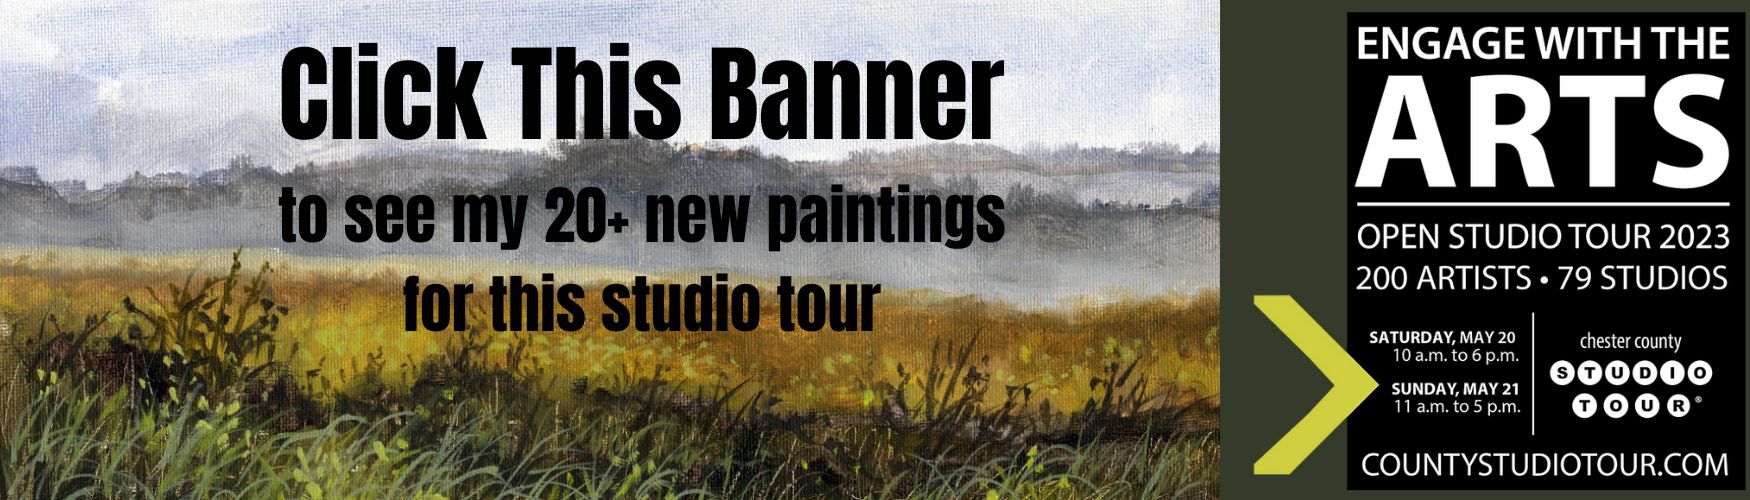 New paintings for 2023 Chester County Studio Tour